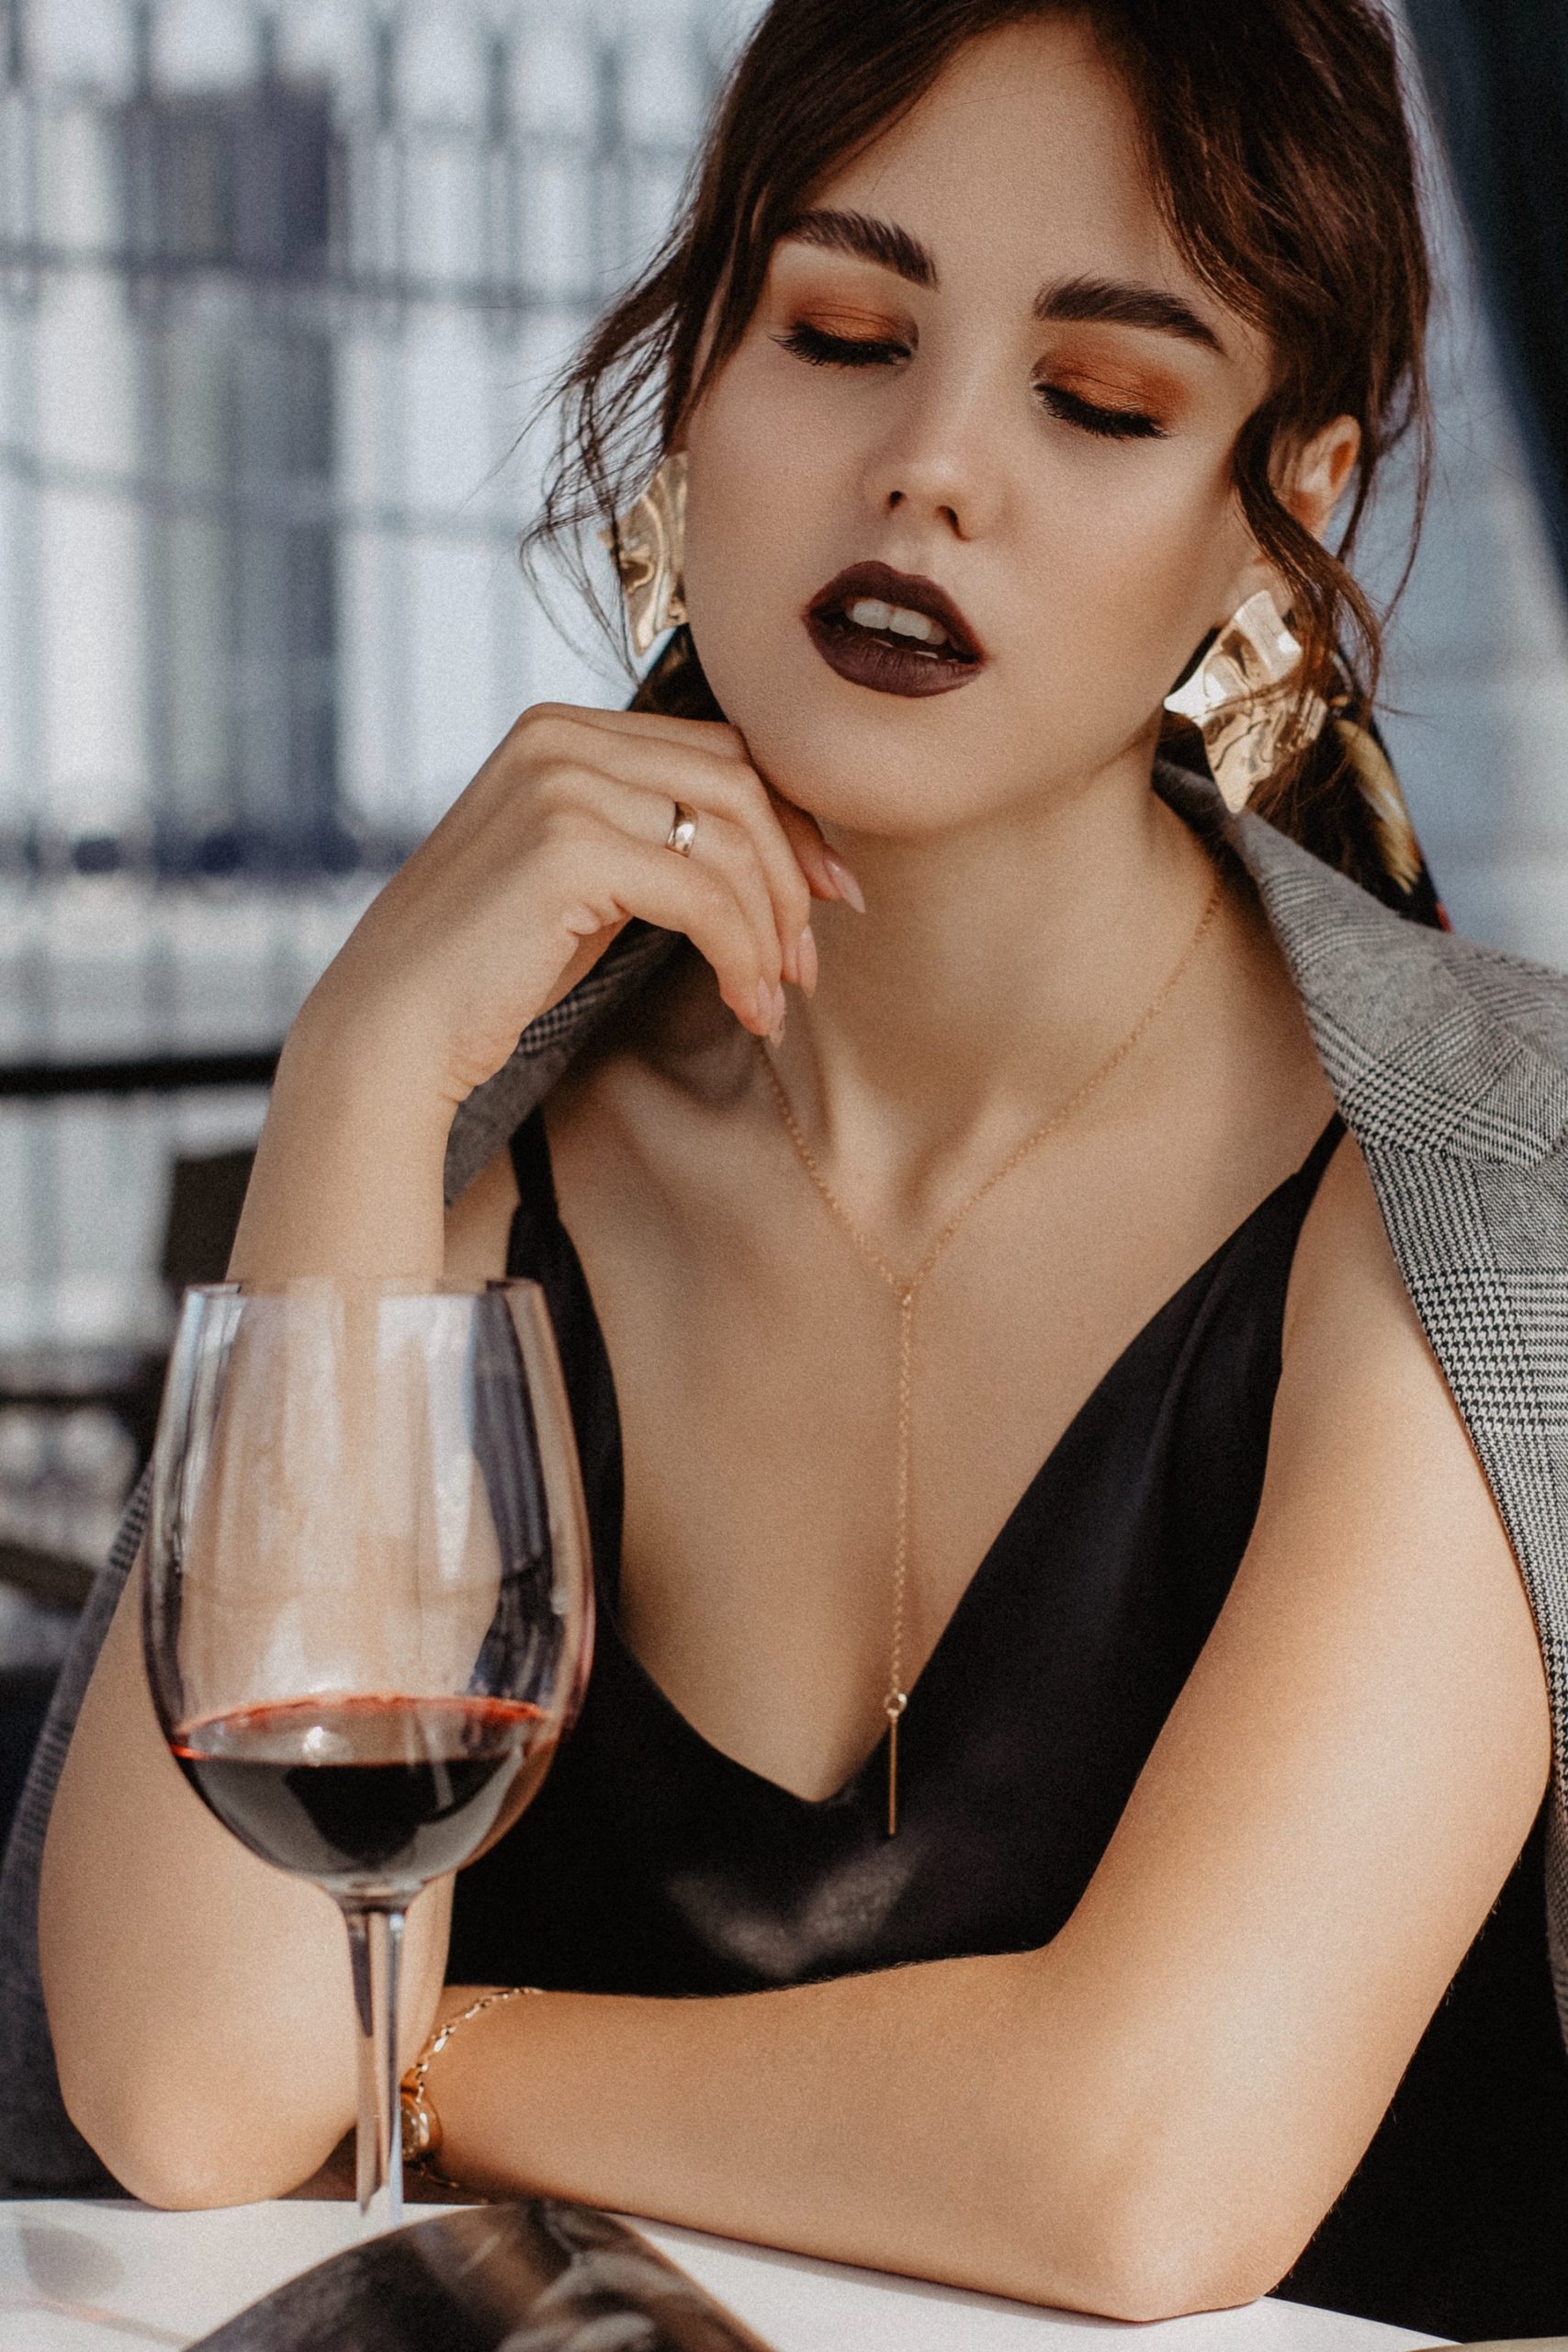 slurring young woman chilling in front of a glass of red wine